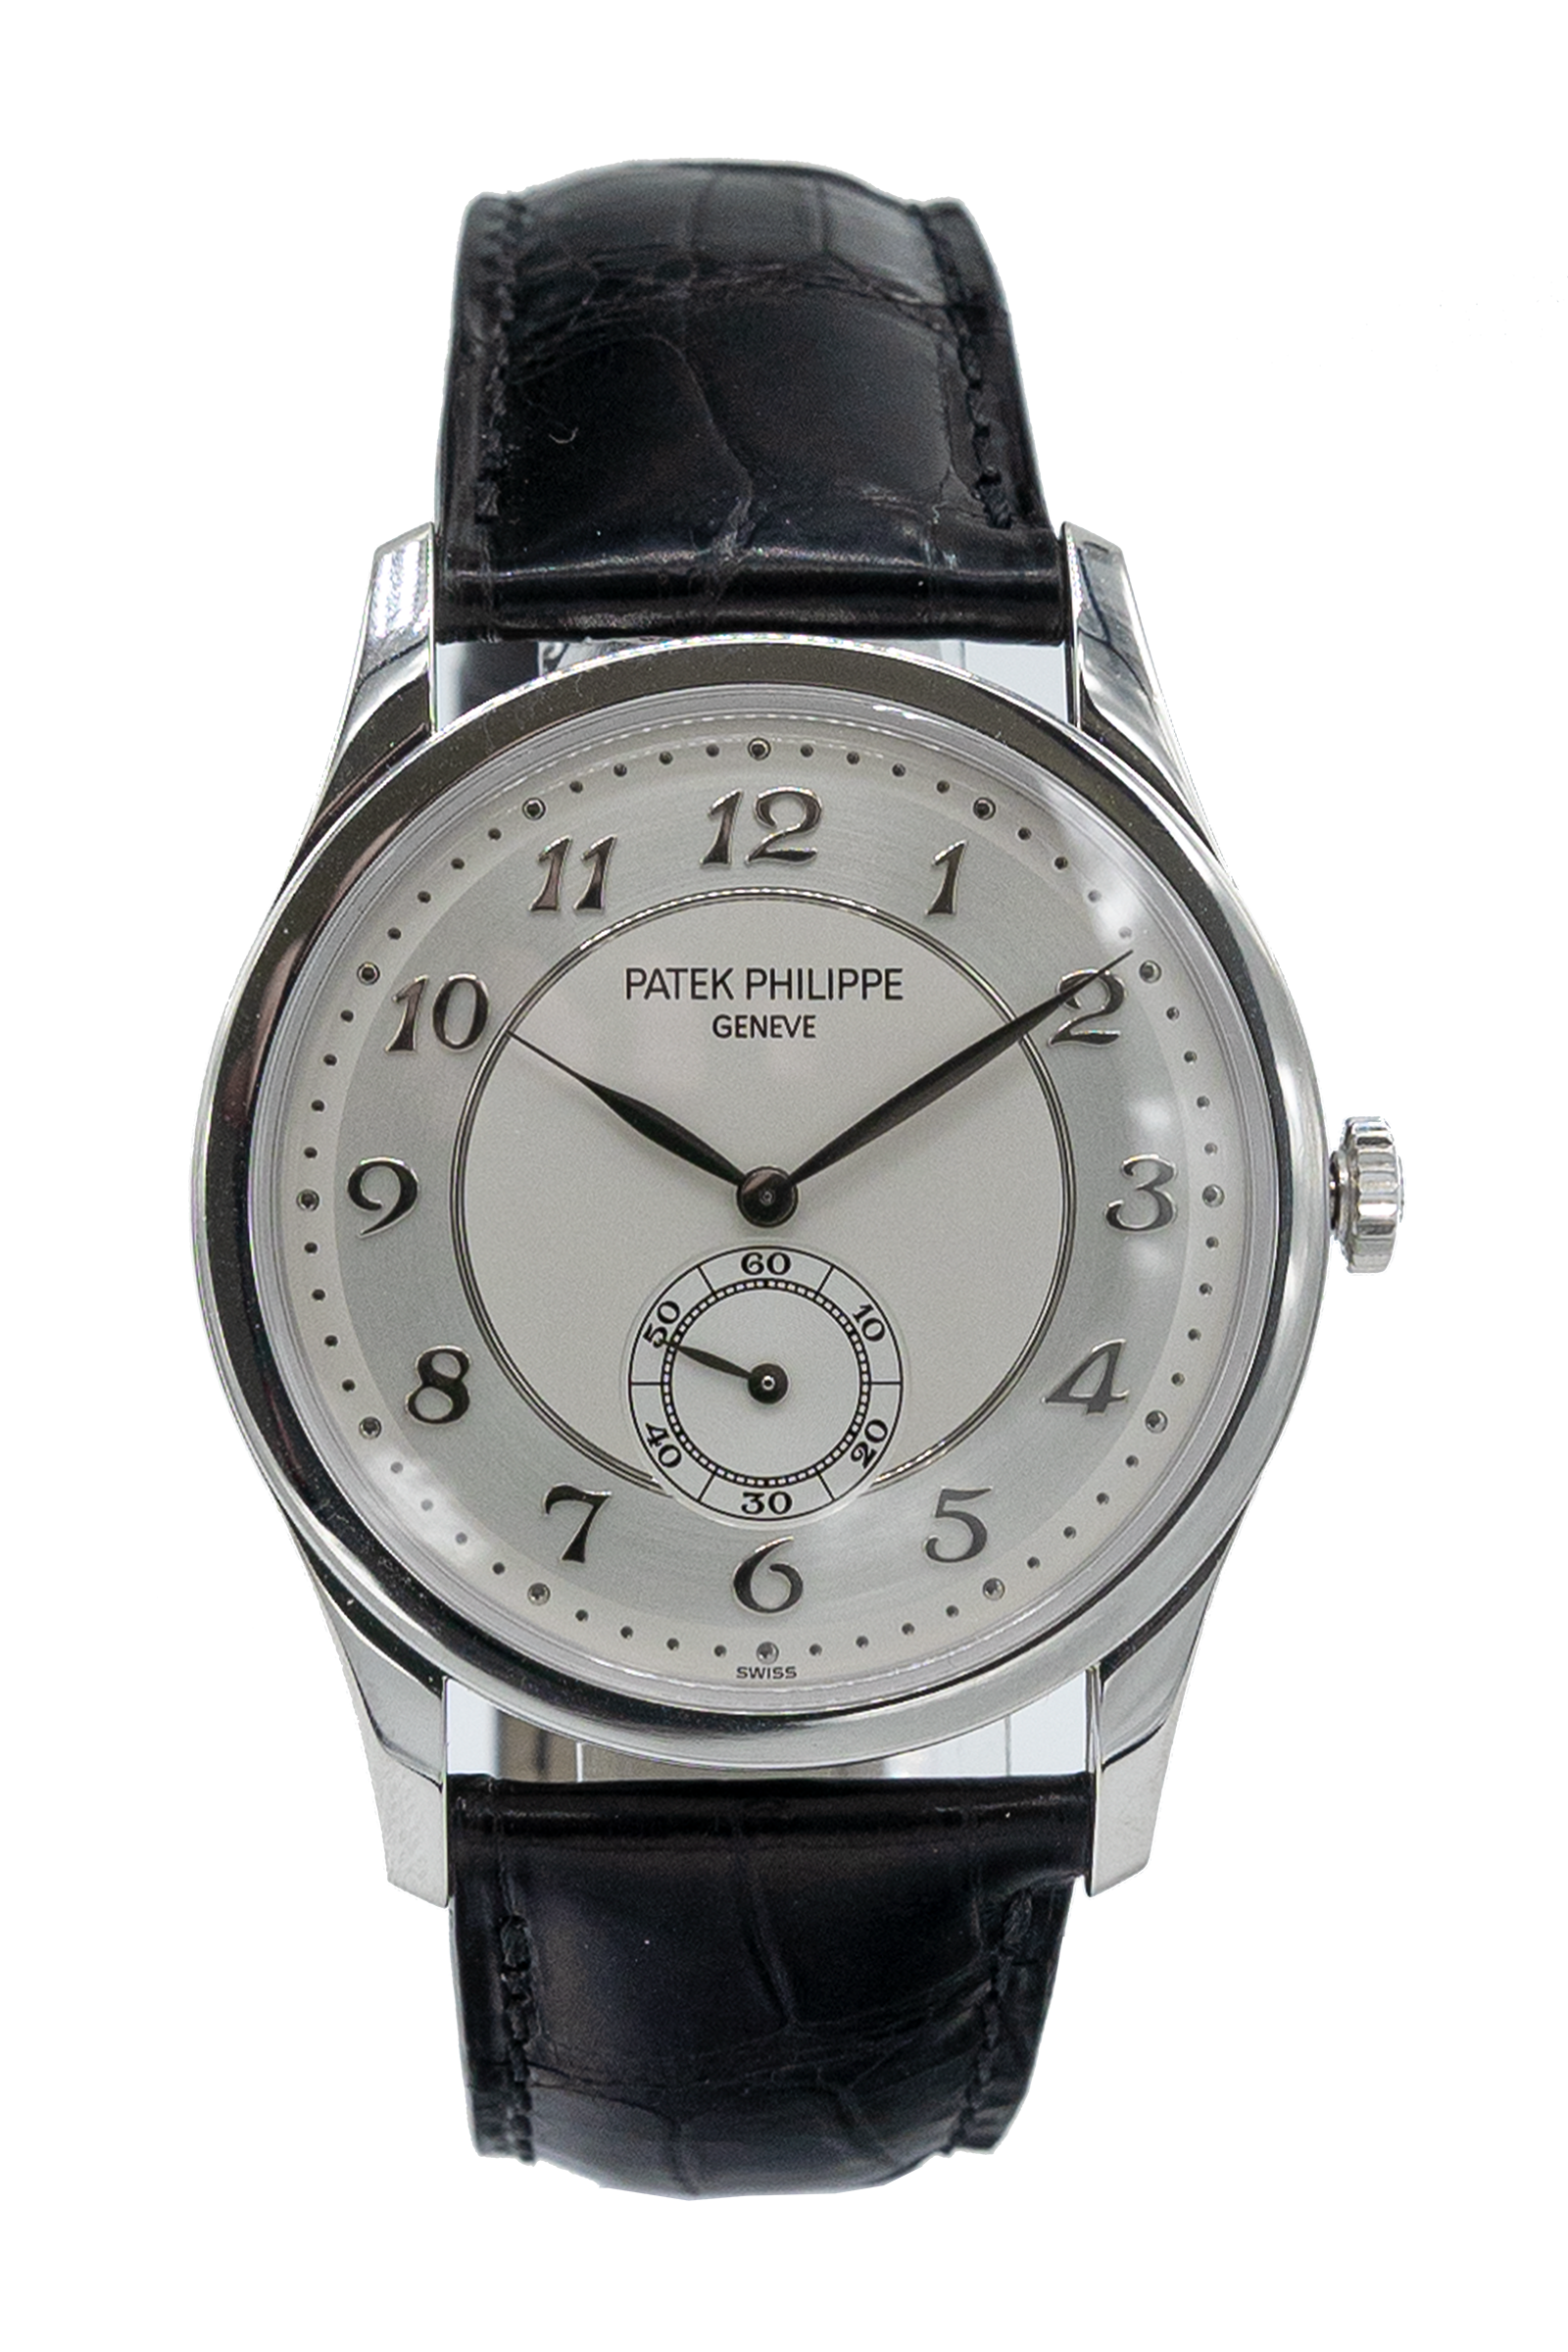 Patek Philippe reference "5196p-001" Calatrava platinum luxury watch with mother of pearl dial